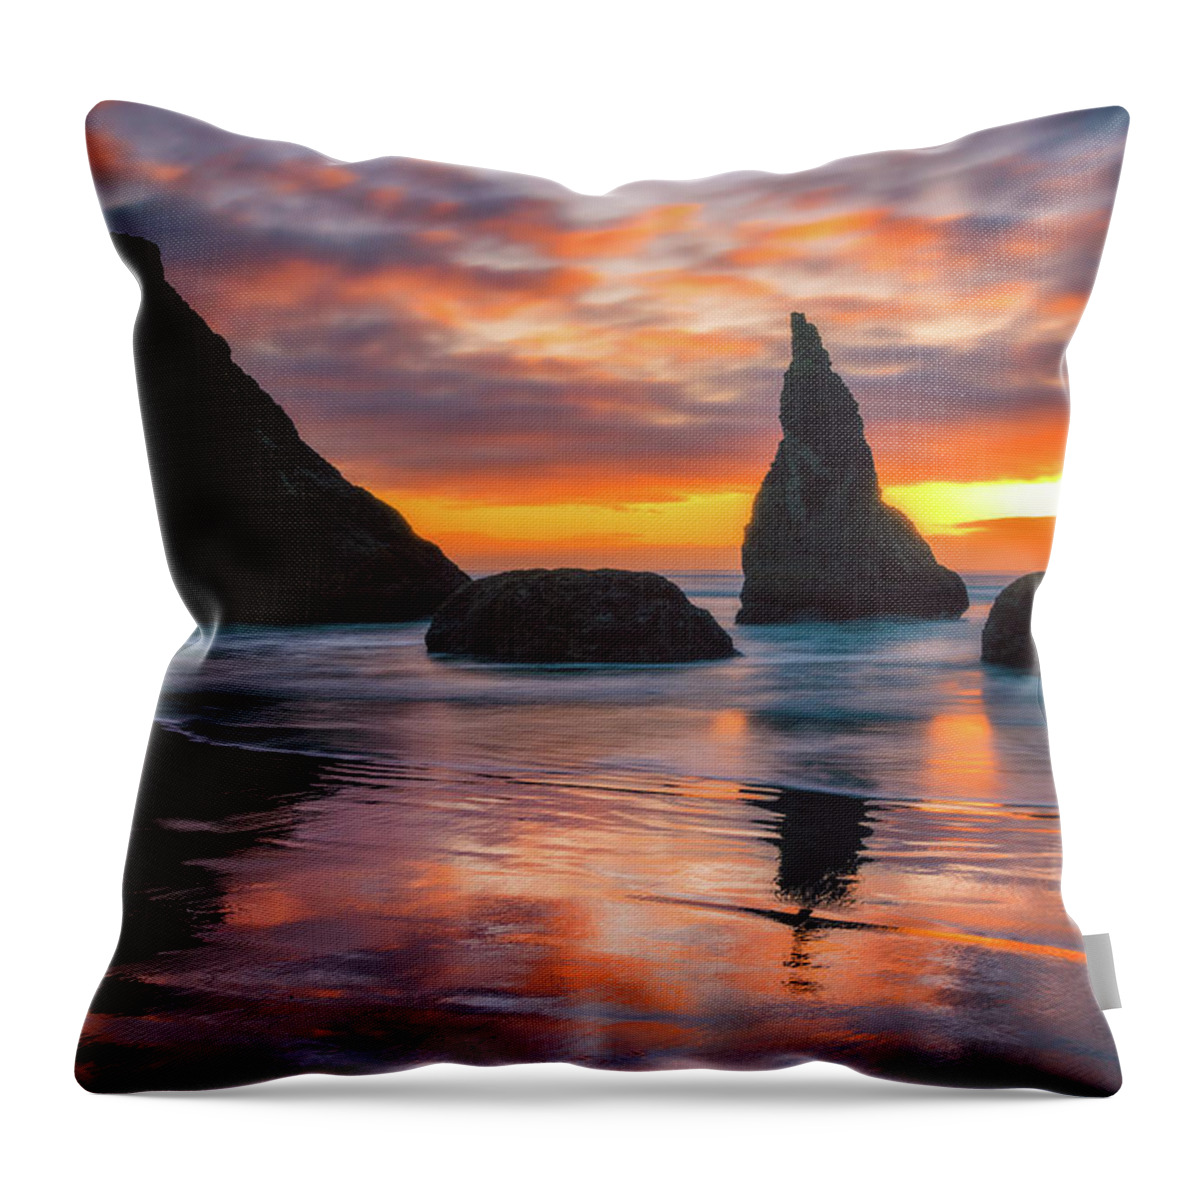 Bandon Throw Pillow featuring the photograph Late Night Cloud Dance by Darren White